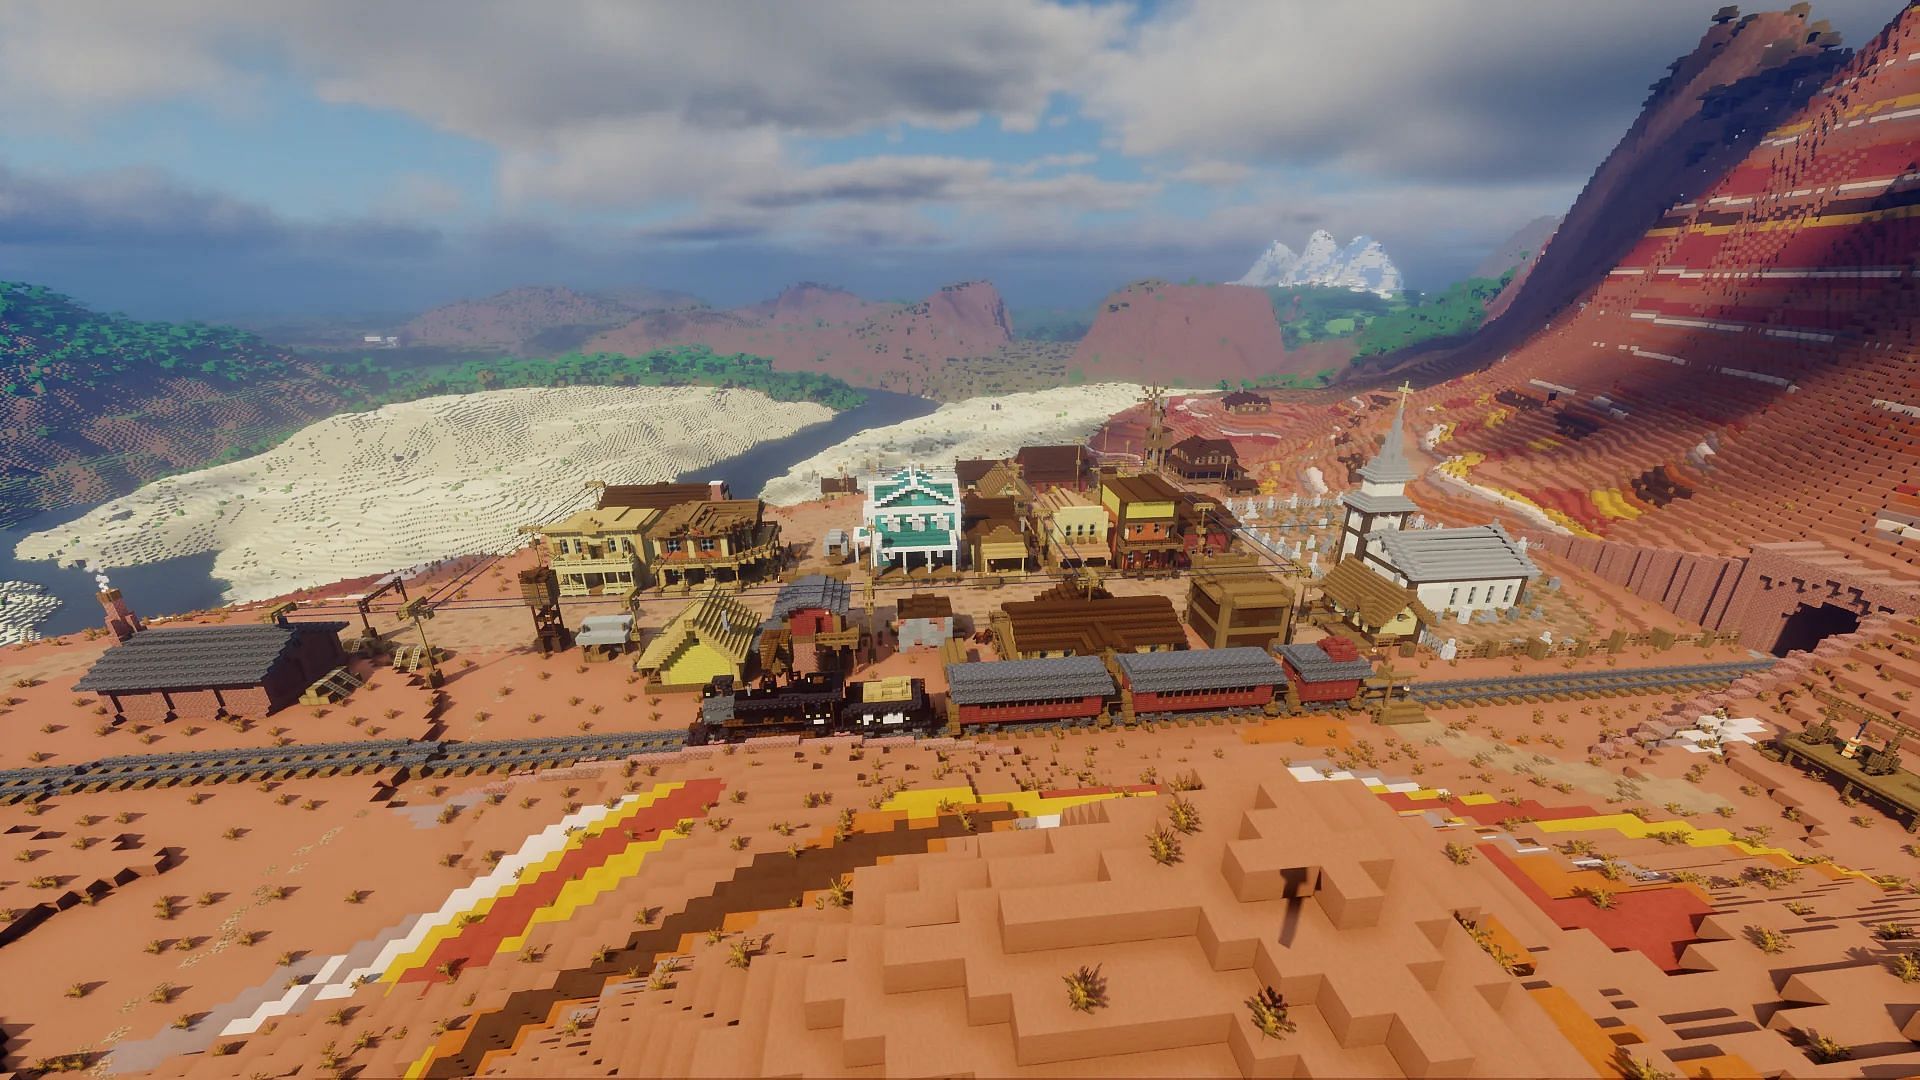 This Minecraft Red Dead Redemption build adds some Wild West flair to this badlands biome (Image via Walzon_/Reddit)